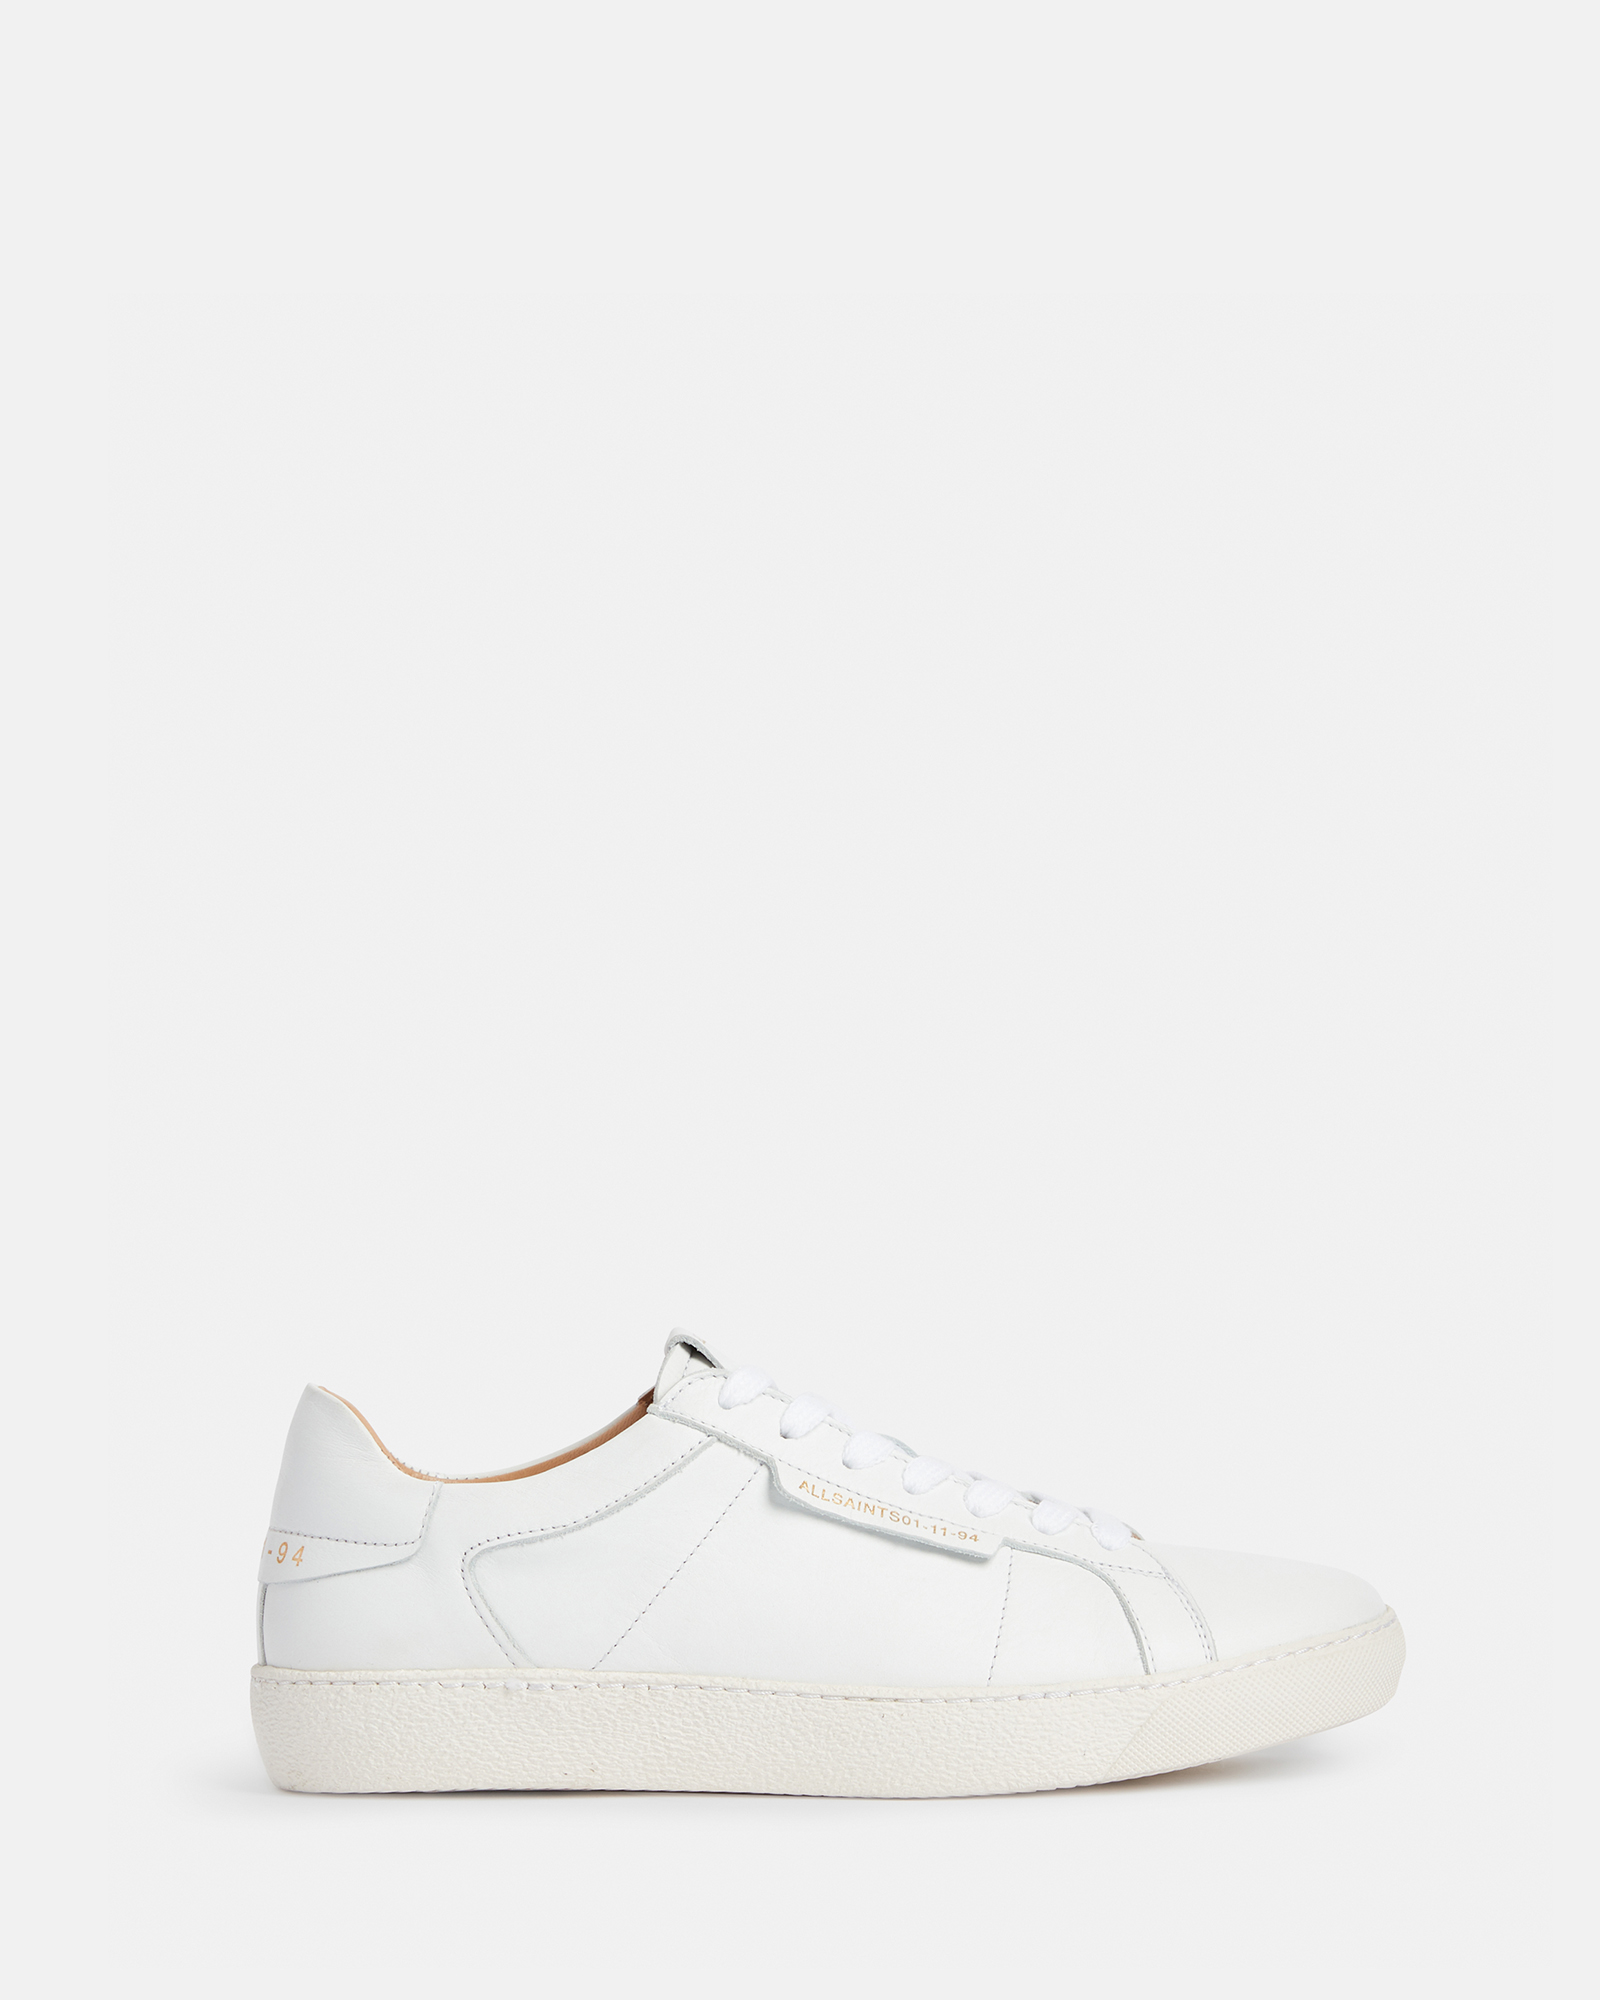 AllSaints Sheer Round Toe Leather Trainers